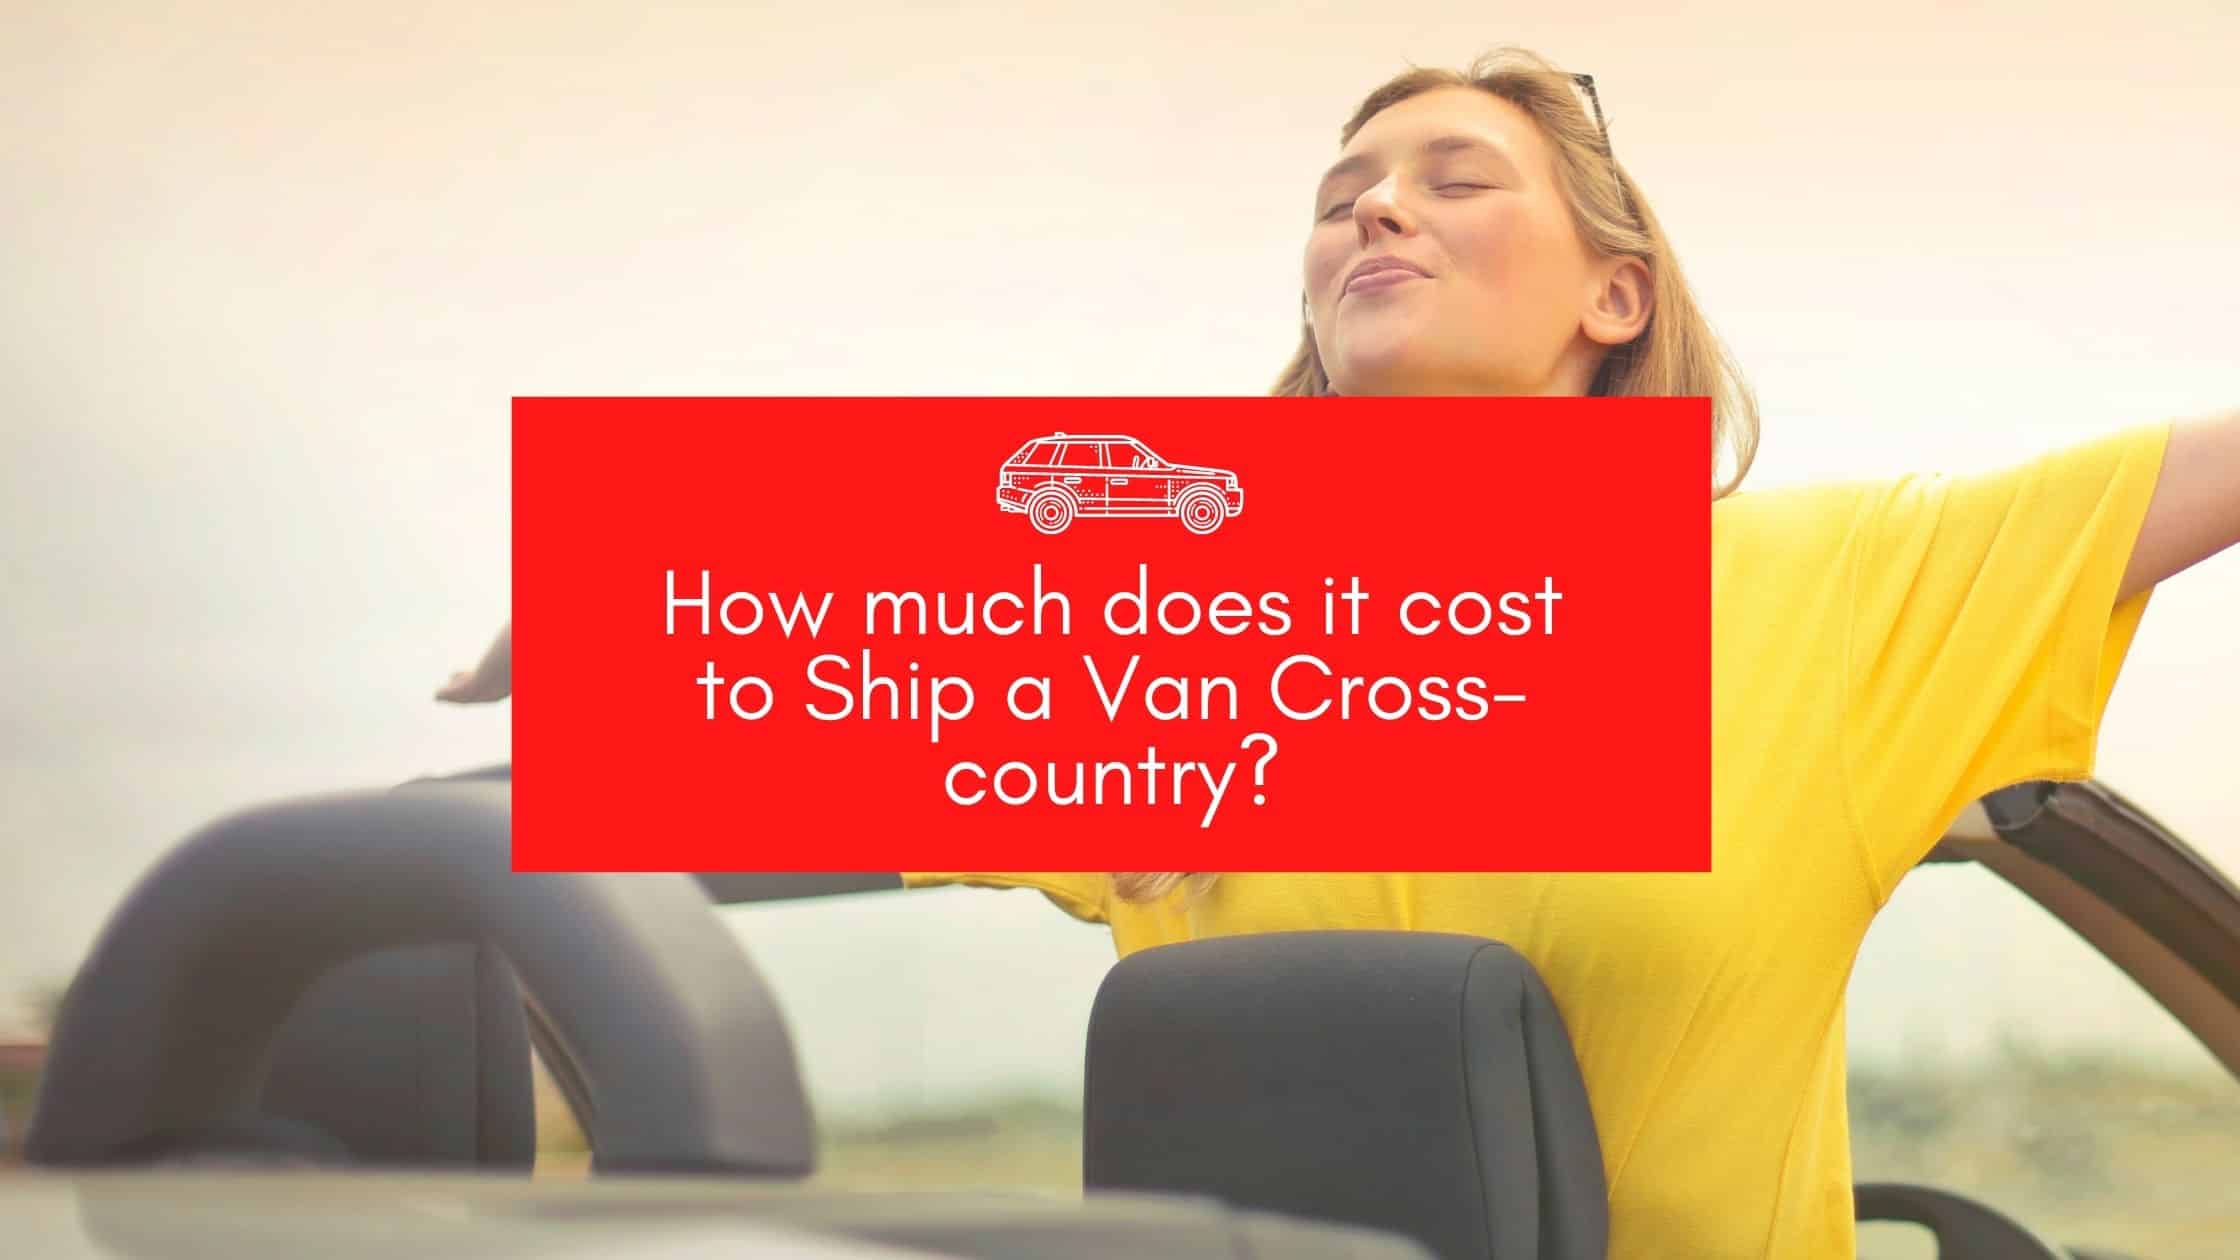 How much does it cost to Ship a Van Cross-country?